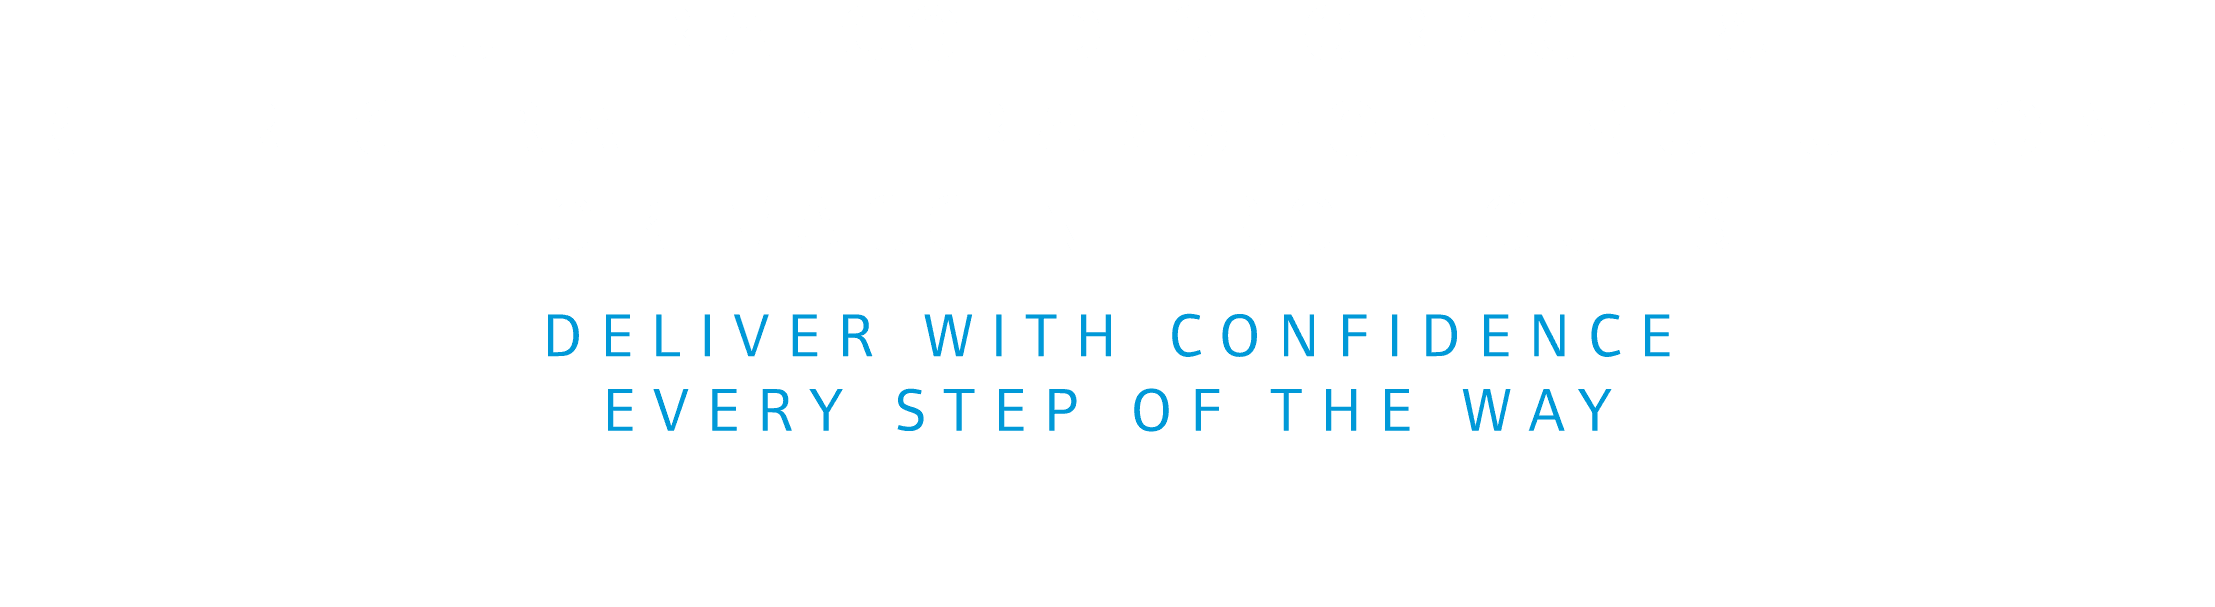 ULTRA COLd STORAGE & REFRIGERATED TRANSPORT SOLUTIONS for vaccine rollouts Deliver with confidence every step of the way